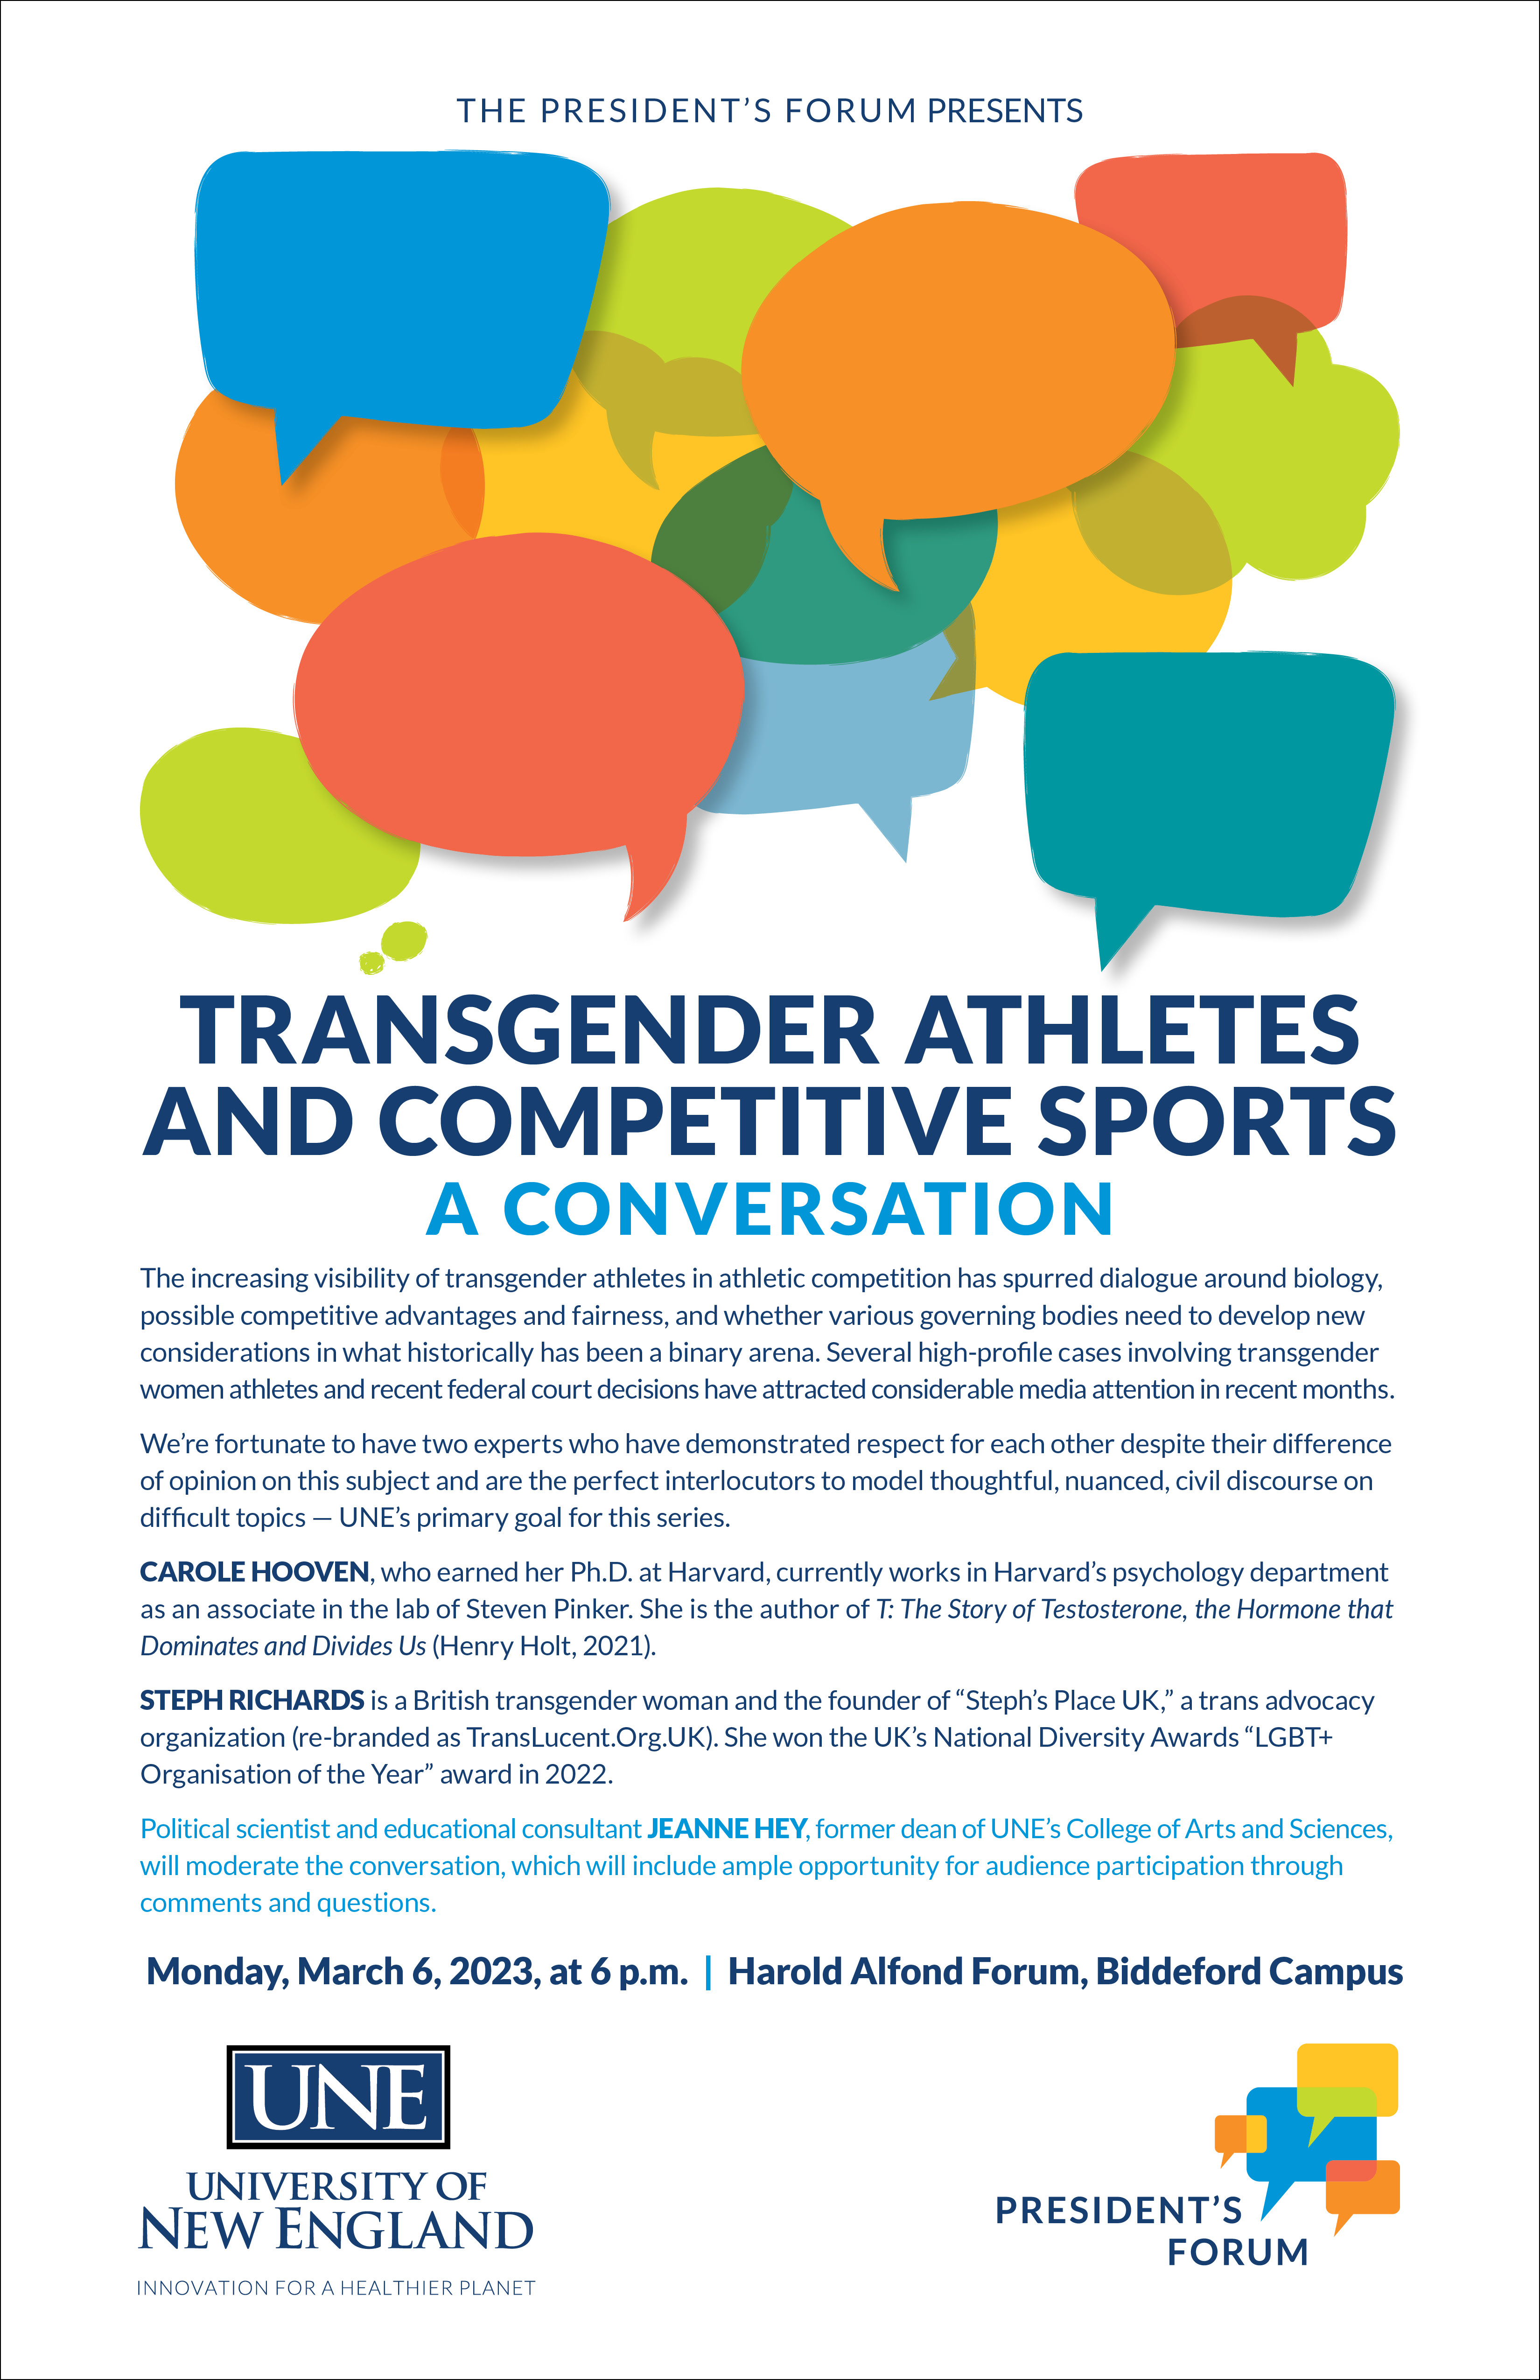 Poster for the 2023 President's Forum "Transgender Athletes and Competitive Sports."